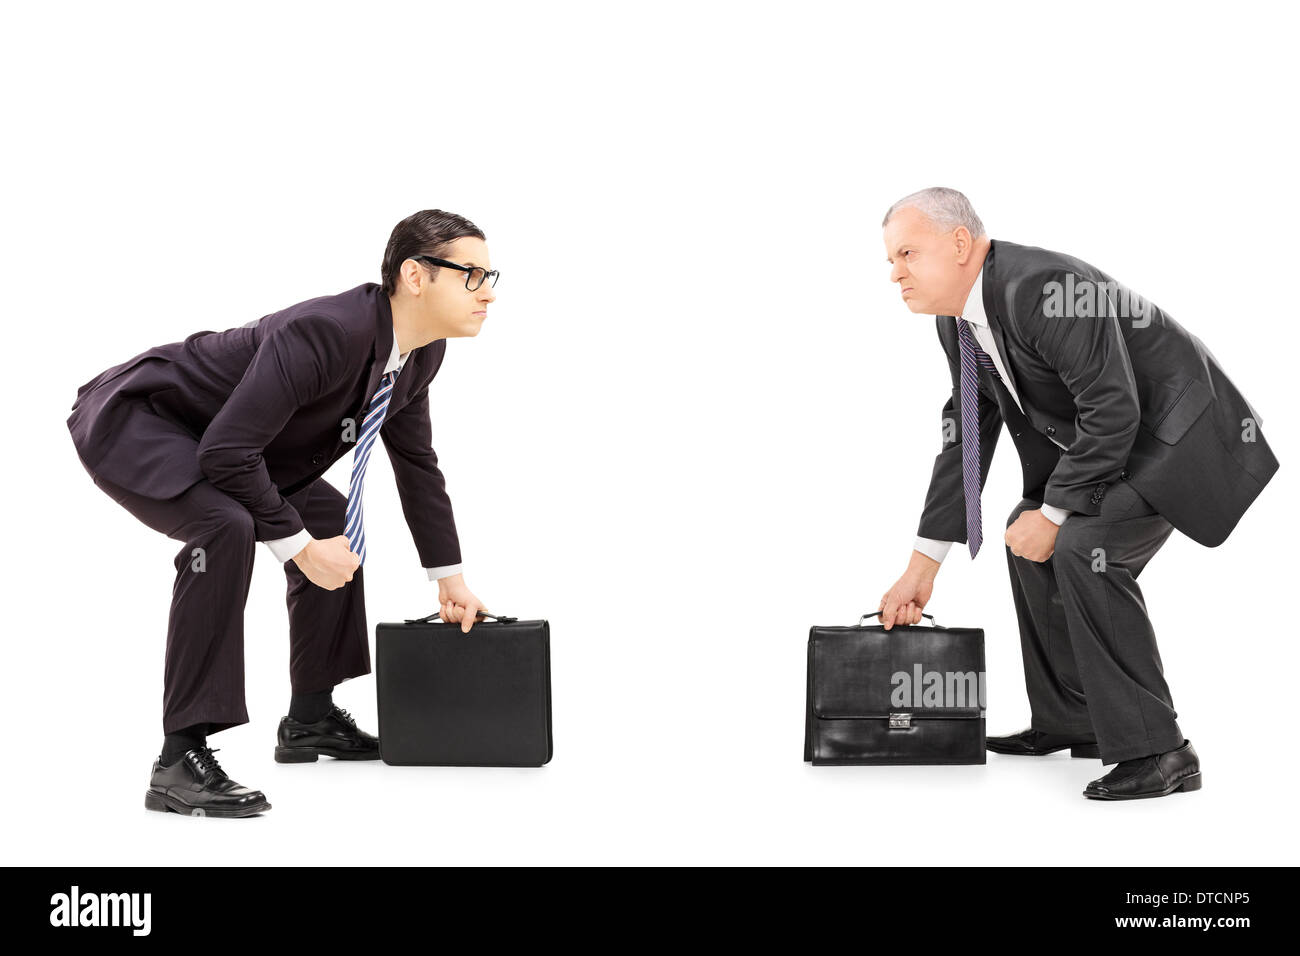 Two competitive businessmen standing in sumo wrestling stance Stock Photo